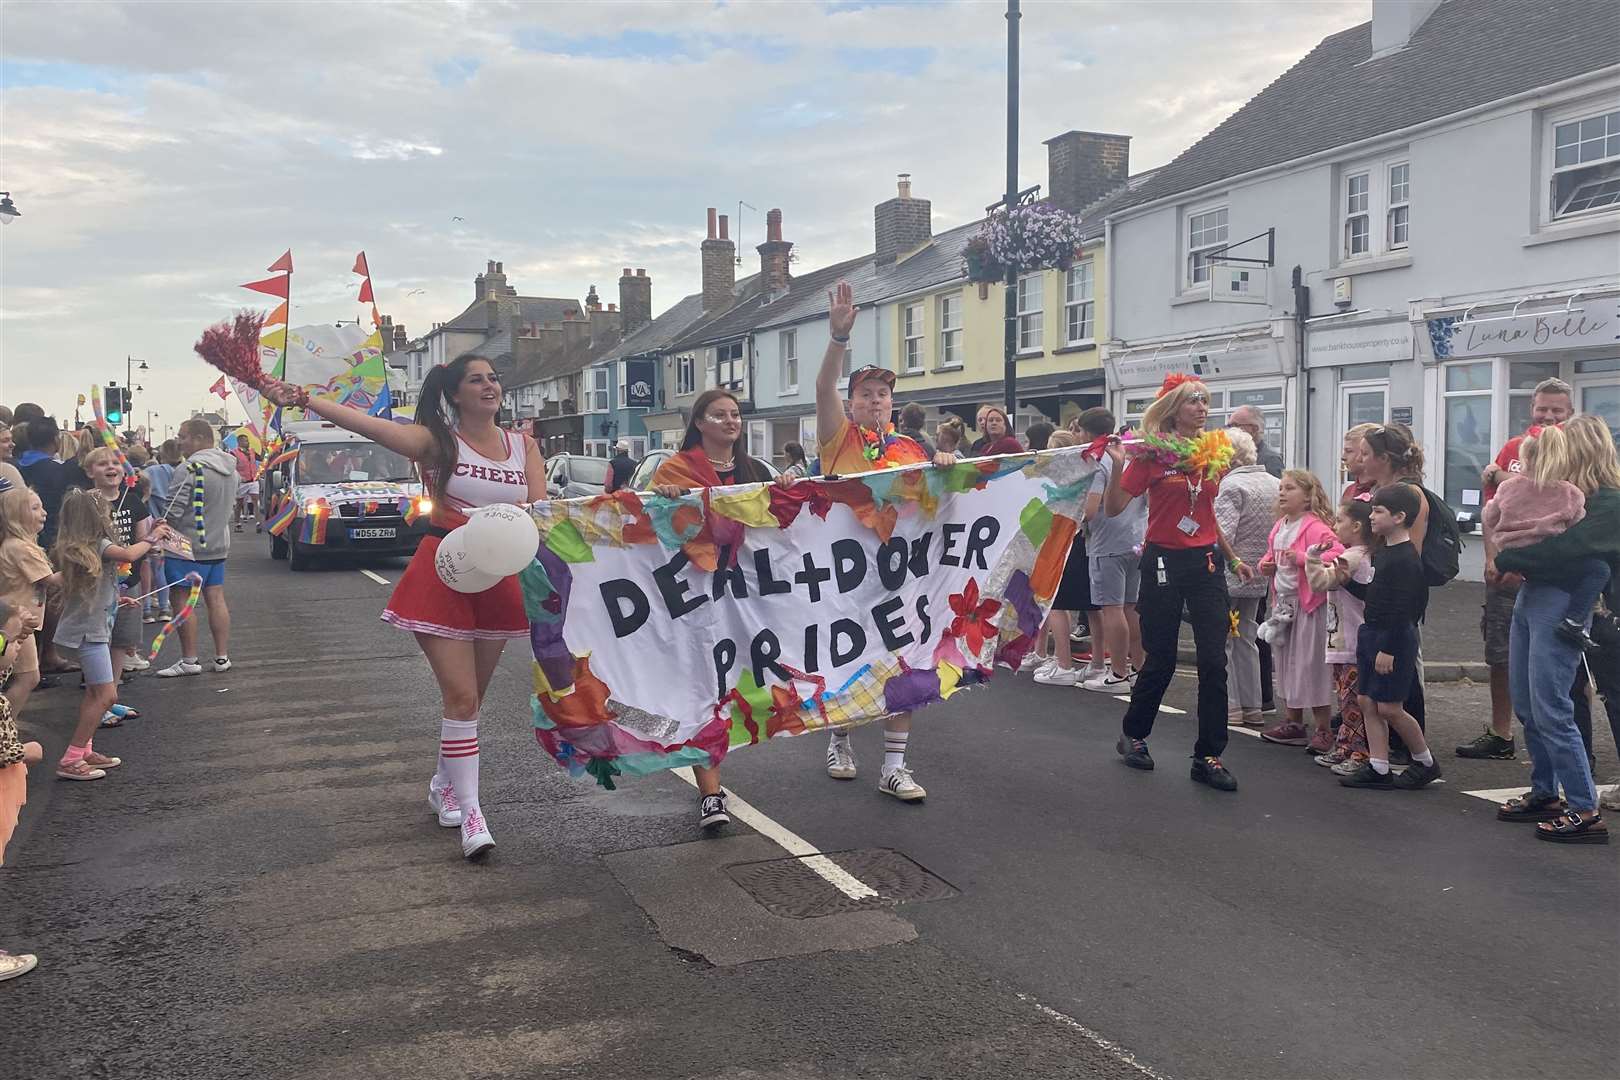 Deal and Dover Pride waved colourful flags and held banners as they passed the crowds